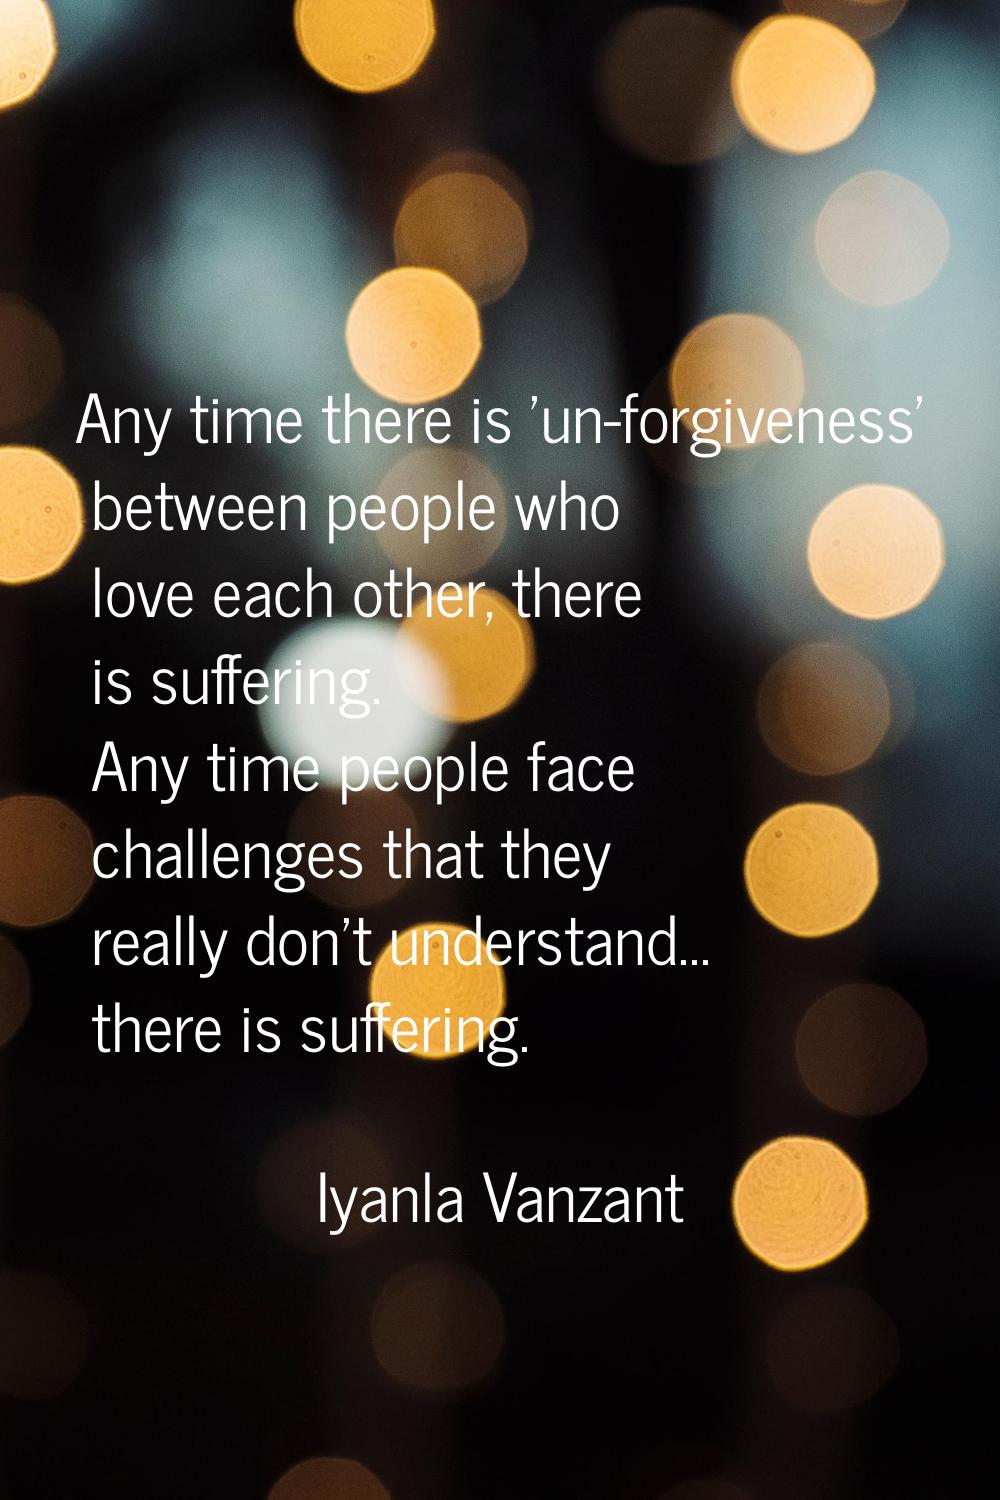 Any time there is 'un-forgiveness' between people who love each other, there is suffering. Any time